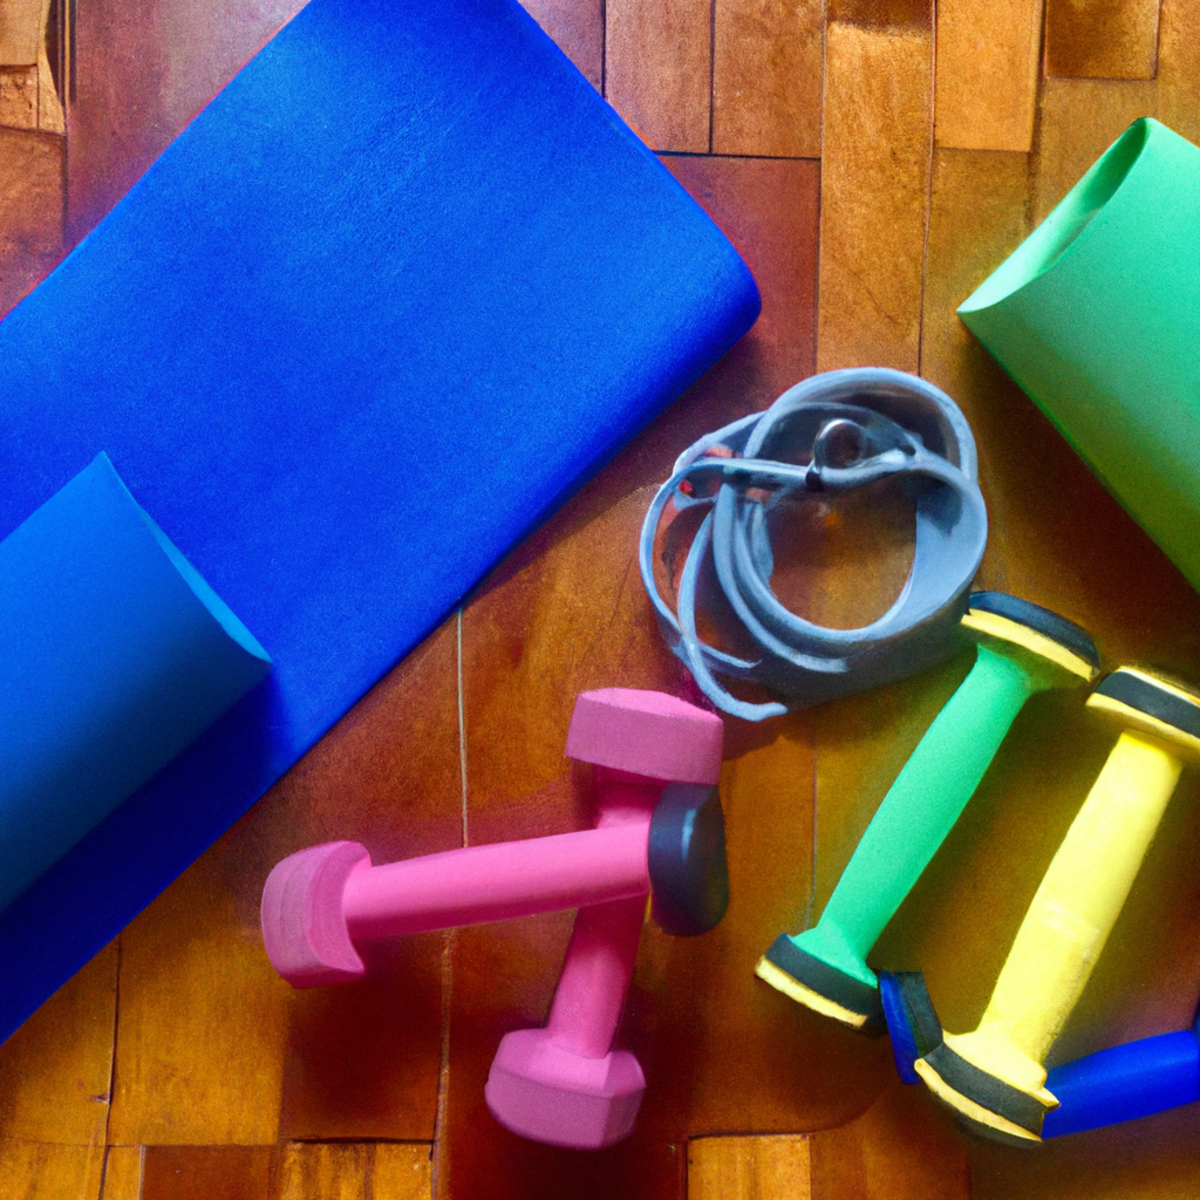 The photo captures a colorful array of fitness equipment, including yoga mats, resistance bands, dumbbells, and a jump rope, neatly arranged on a hardwood floor. The lighting highlights the texture of the mats and the shiny surfaces of the weights, creating a sense of depth and dimensionality. The composition suggests a sense of order and purpose, inviting the viewer to imagine the possibilities of a virtual fitness class.